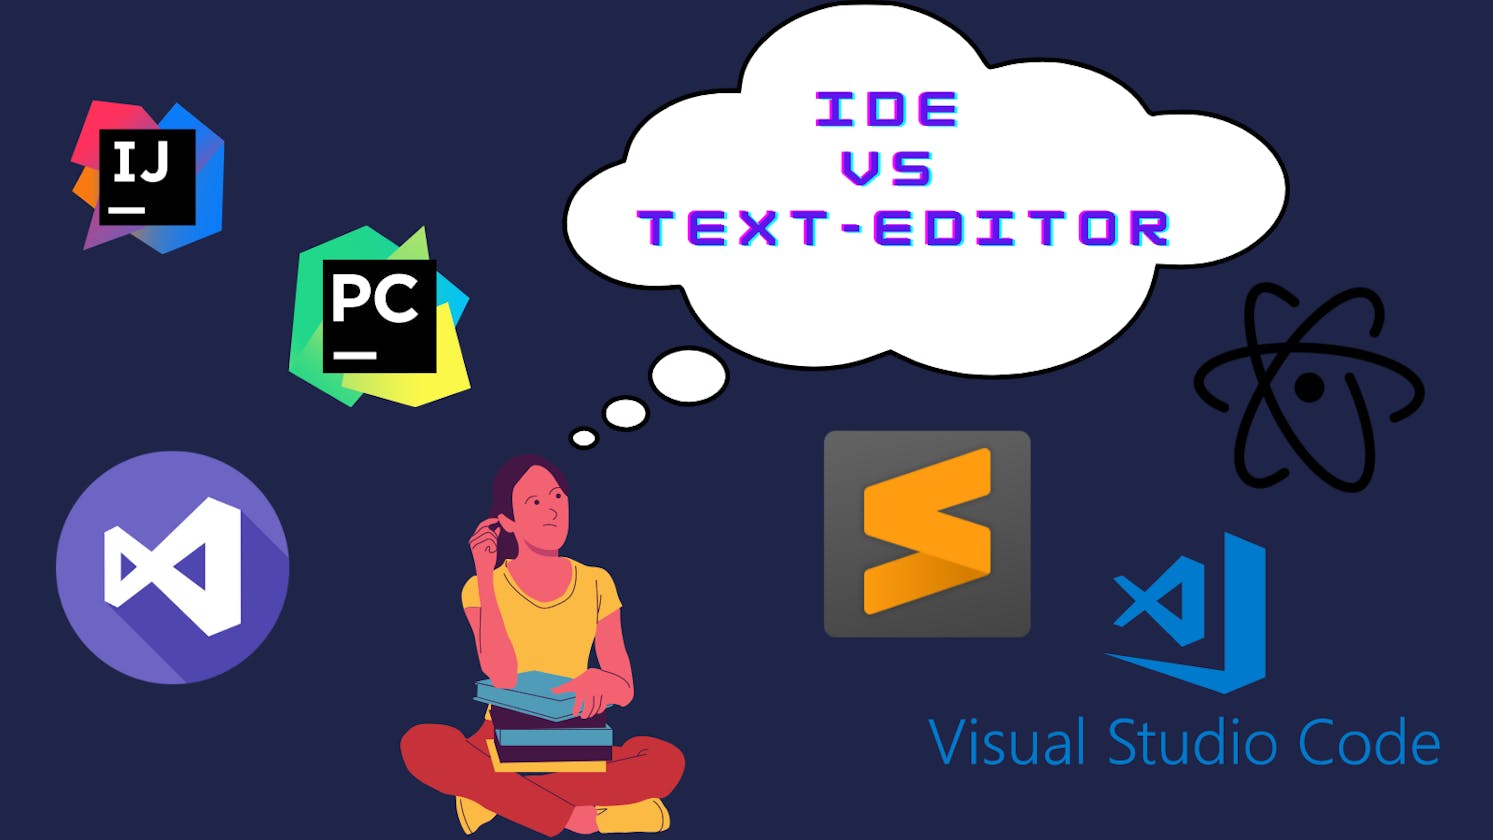 IDE or Text-Editor?